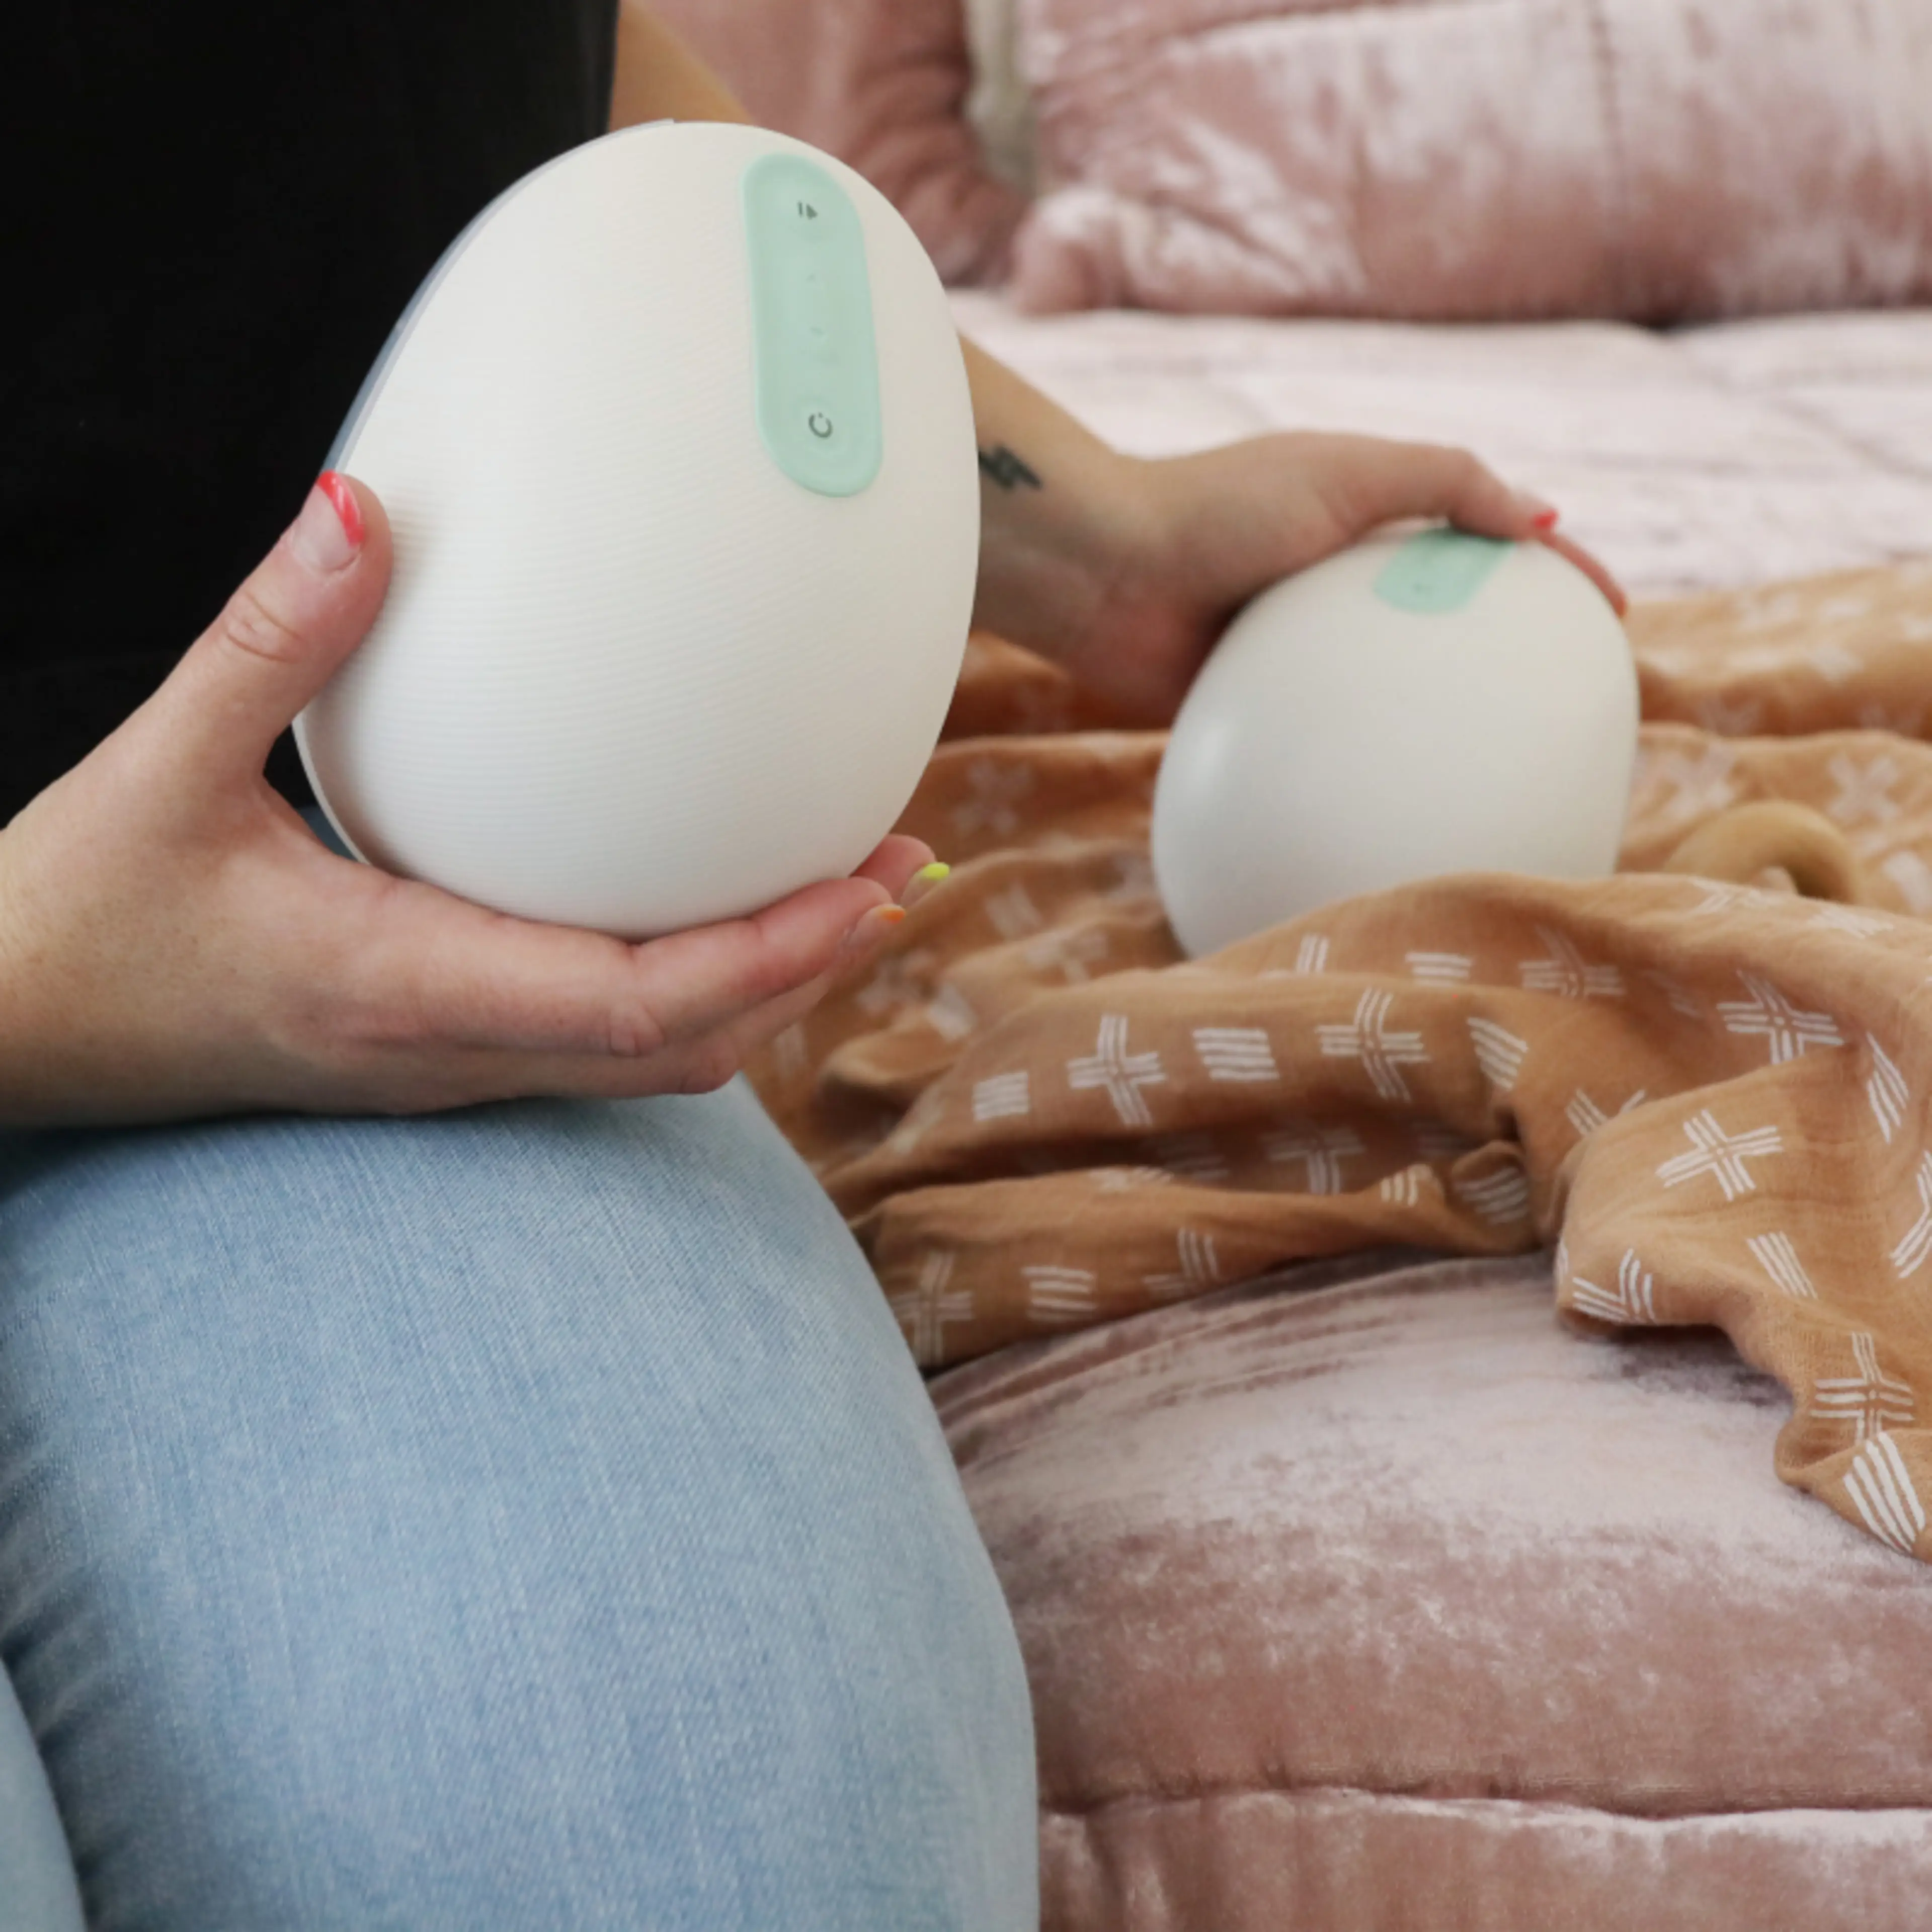 A Lactation Expert Explains How to Make Pumping at Work…Work